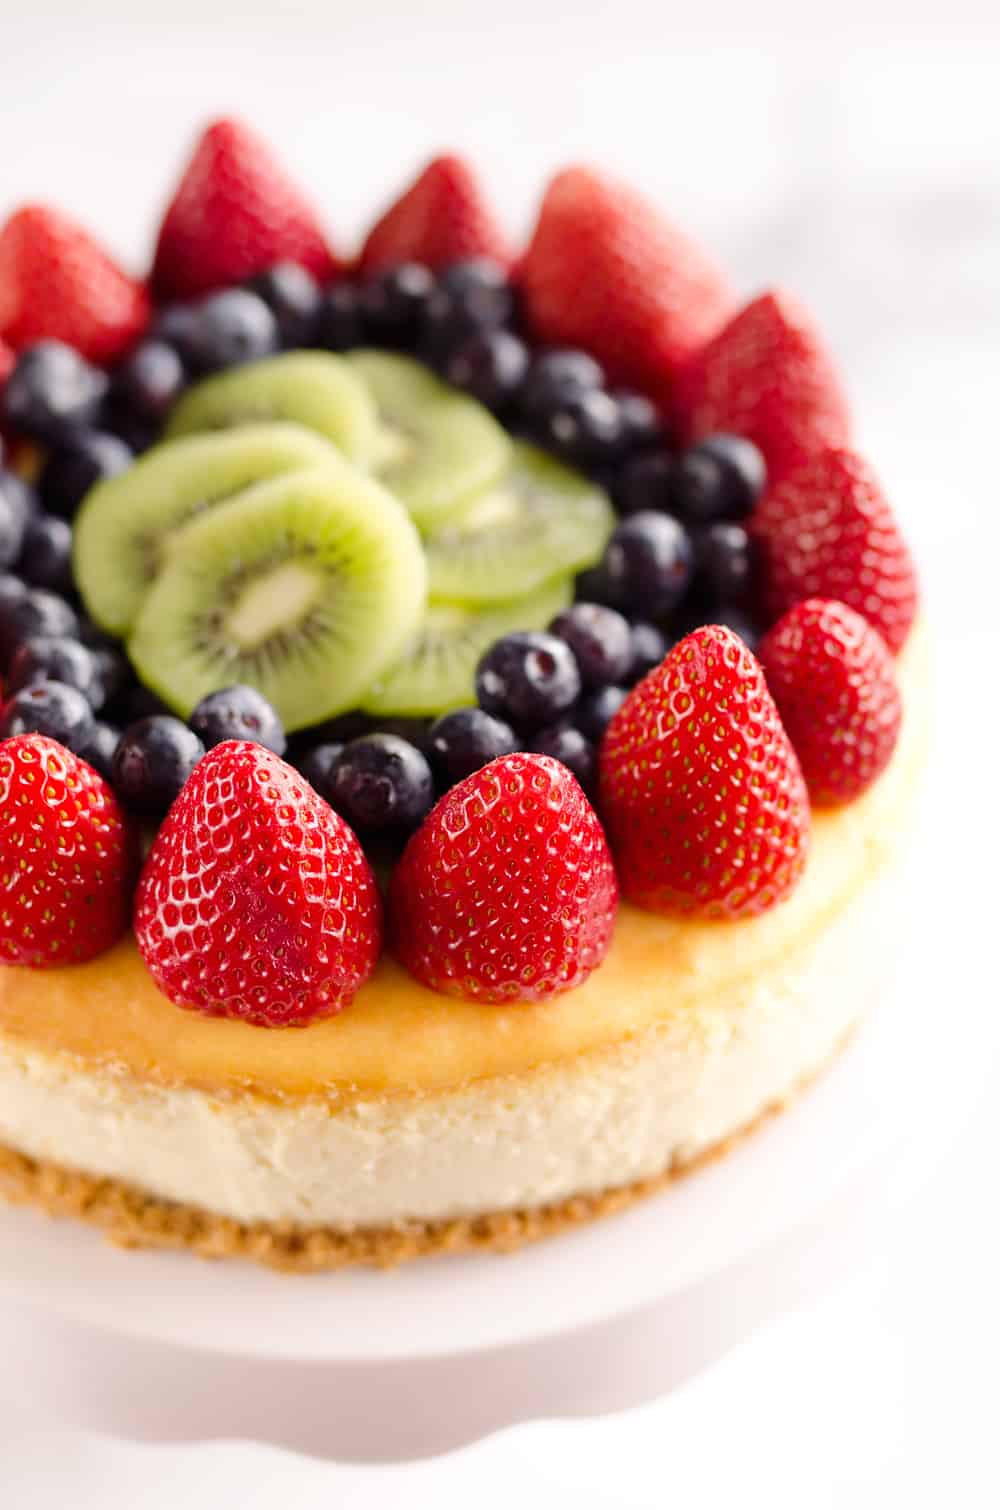 Creamy New York Cheesecake with Fresh Fruit is a rich and decadent dessert recipe that is sure to impress all your dinner guests! 